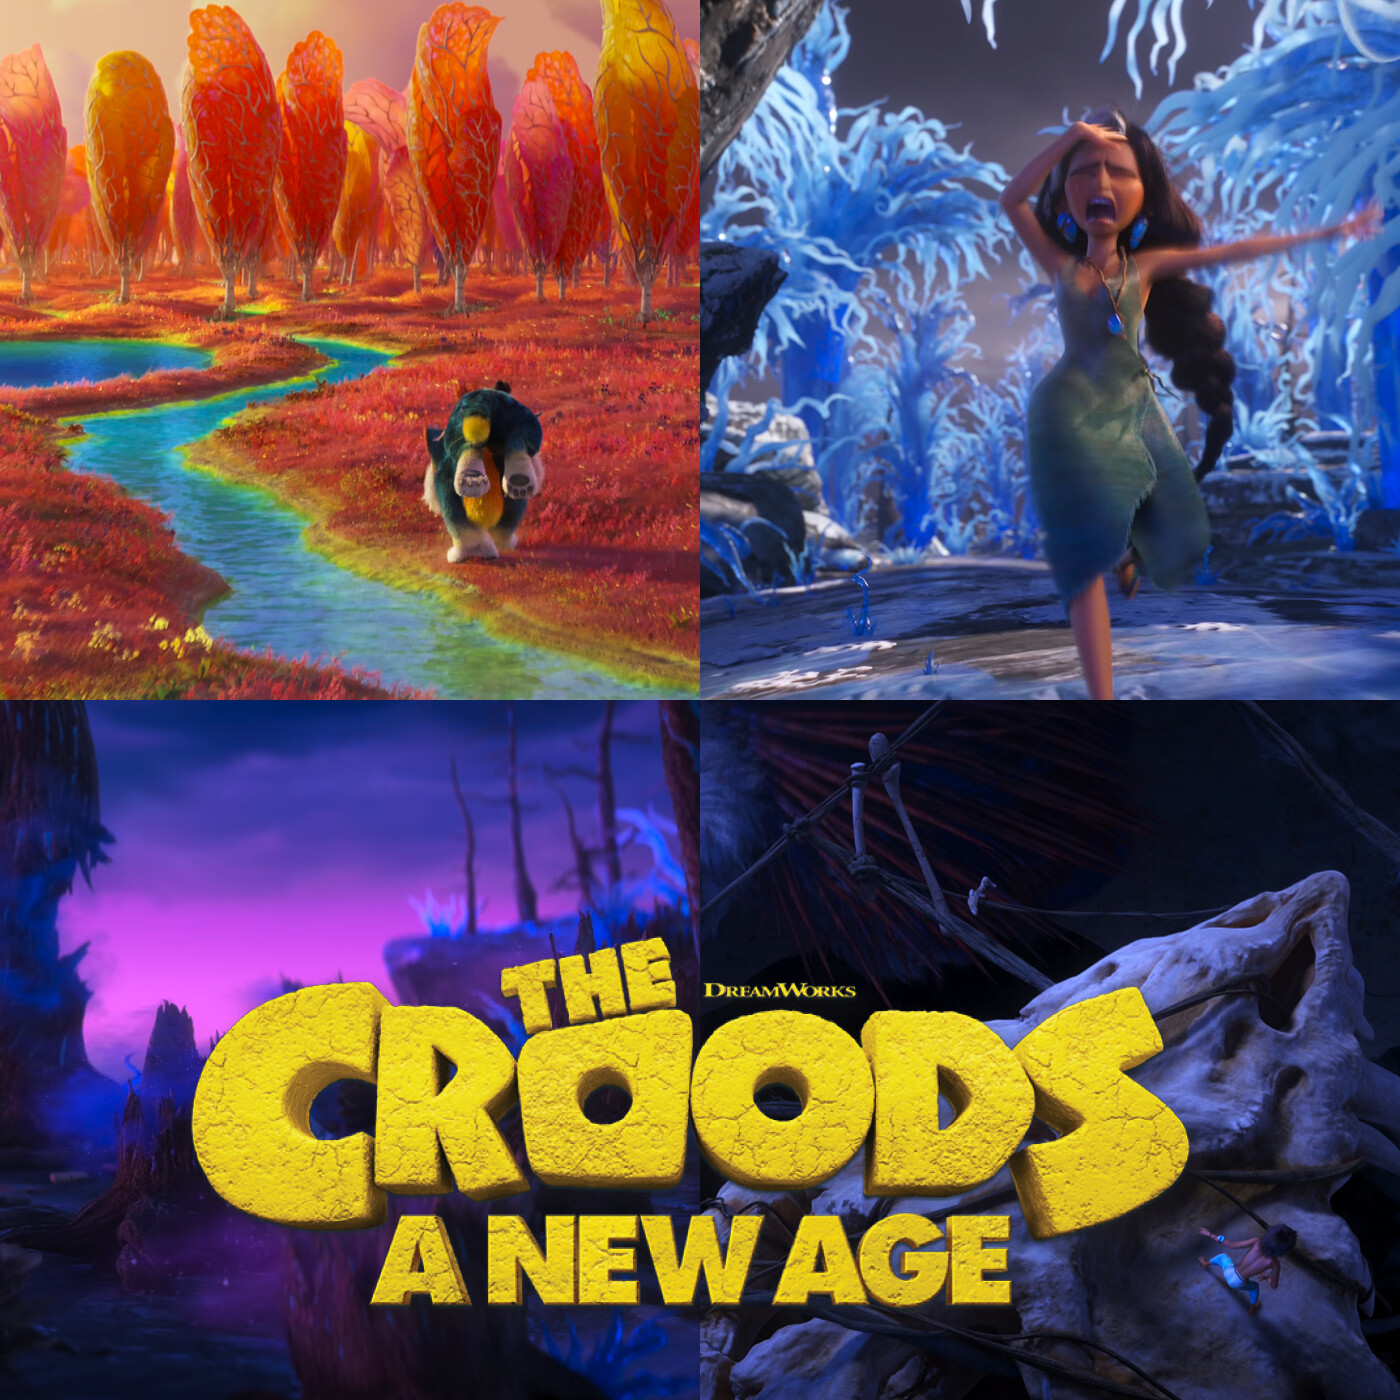 Croods A New Age - Environments